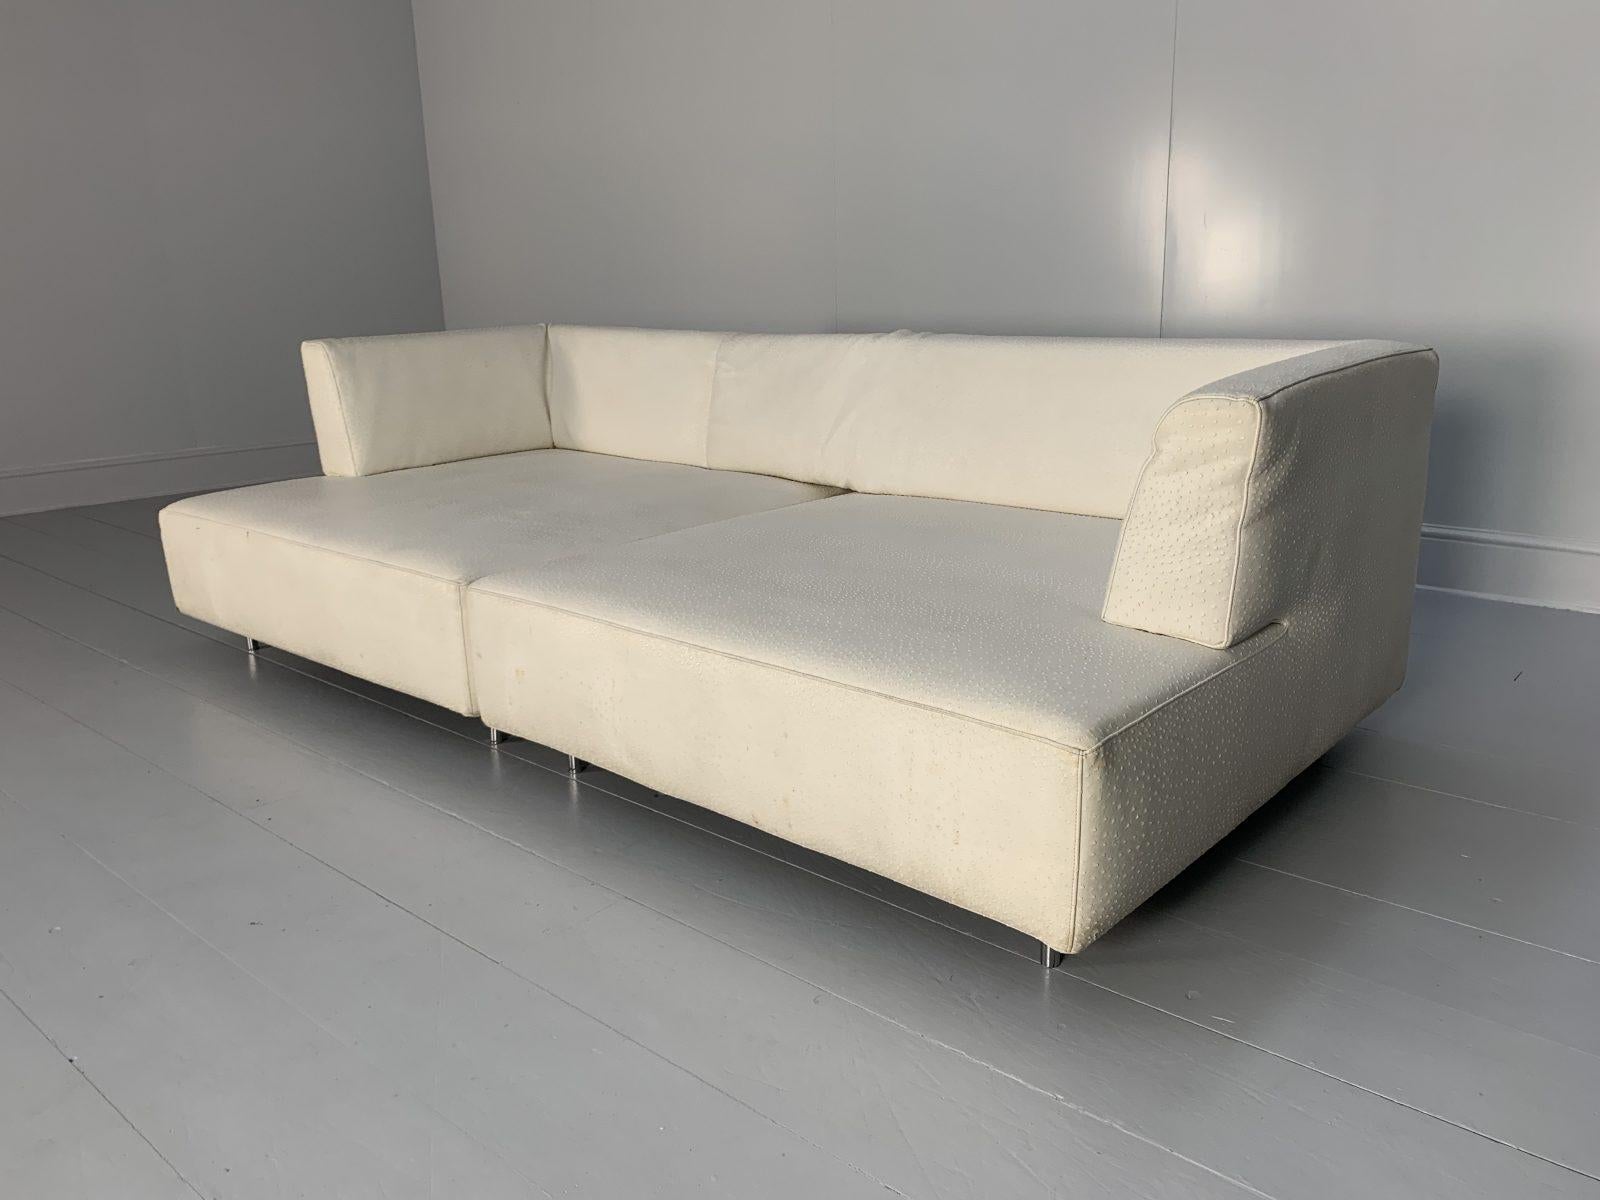 Edra “L’Homme Et La Femme” Sofa in Ostrich Leather In Good Condition For Sale In Barrowford, GB